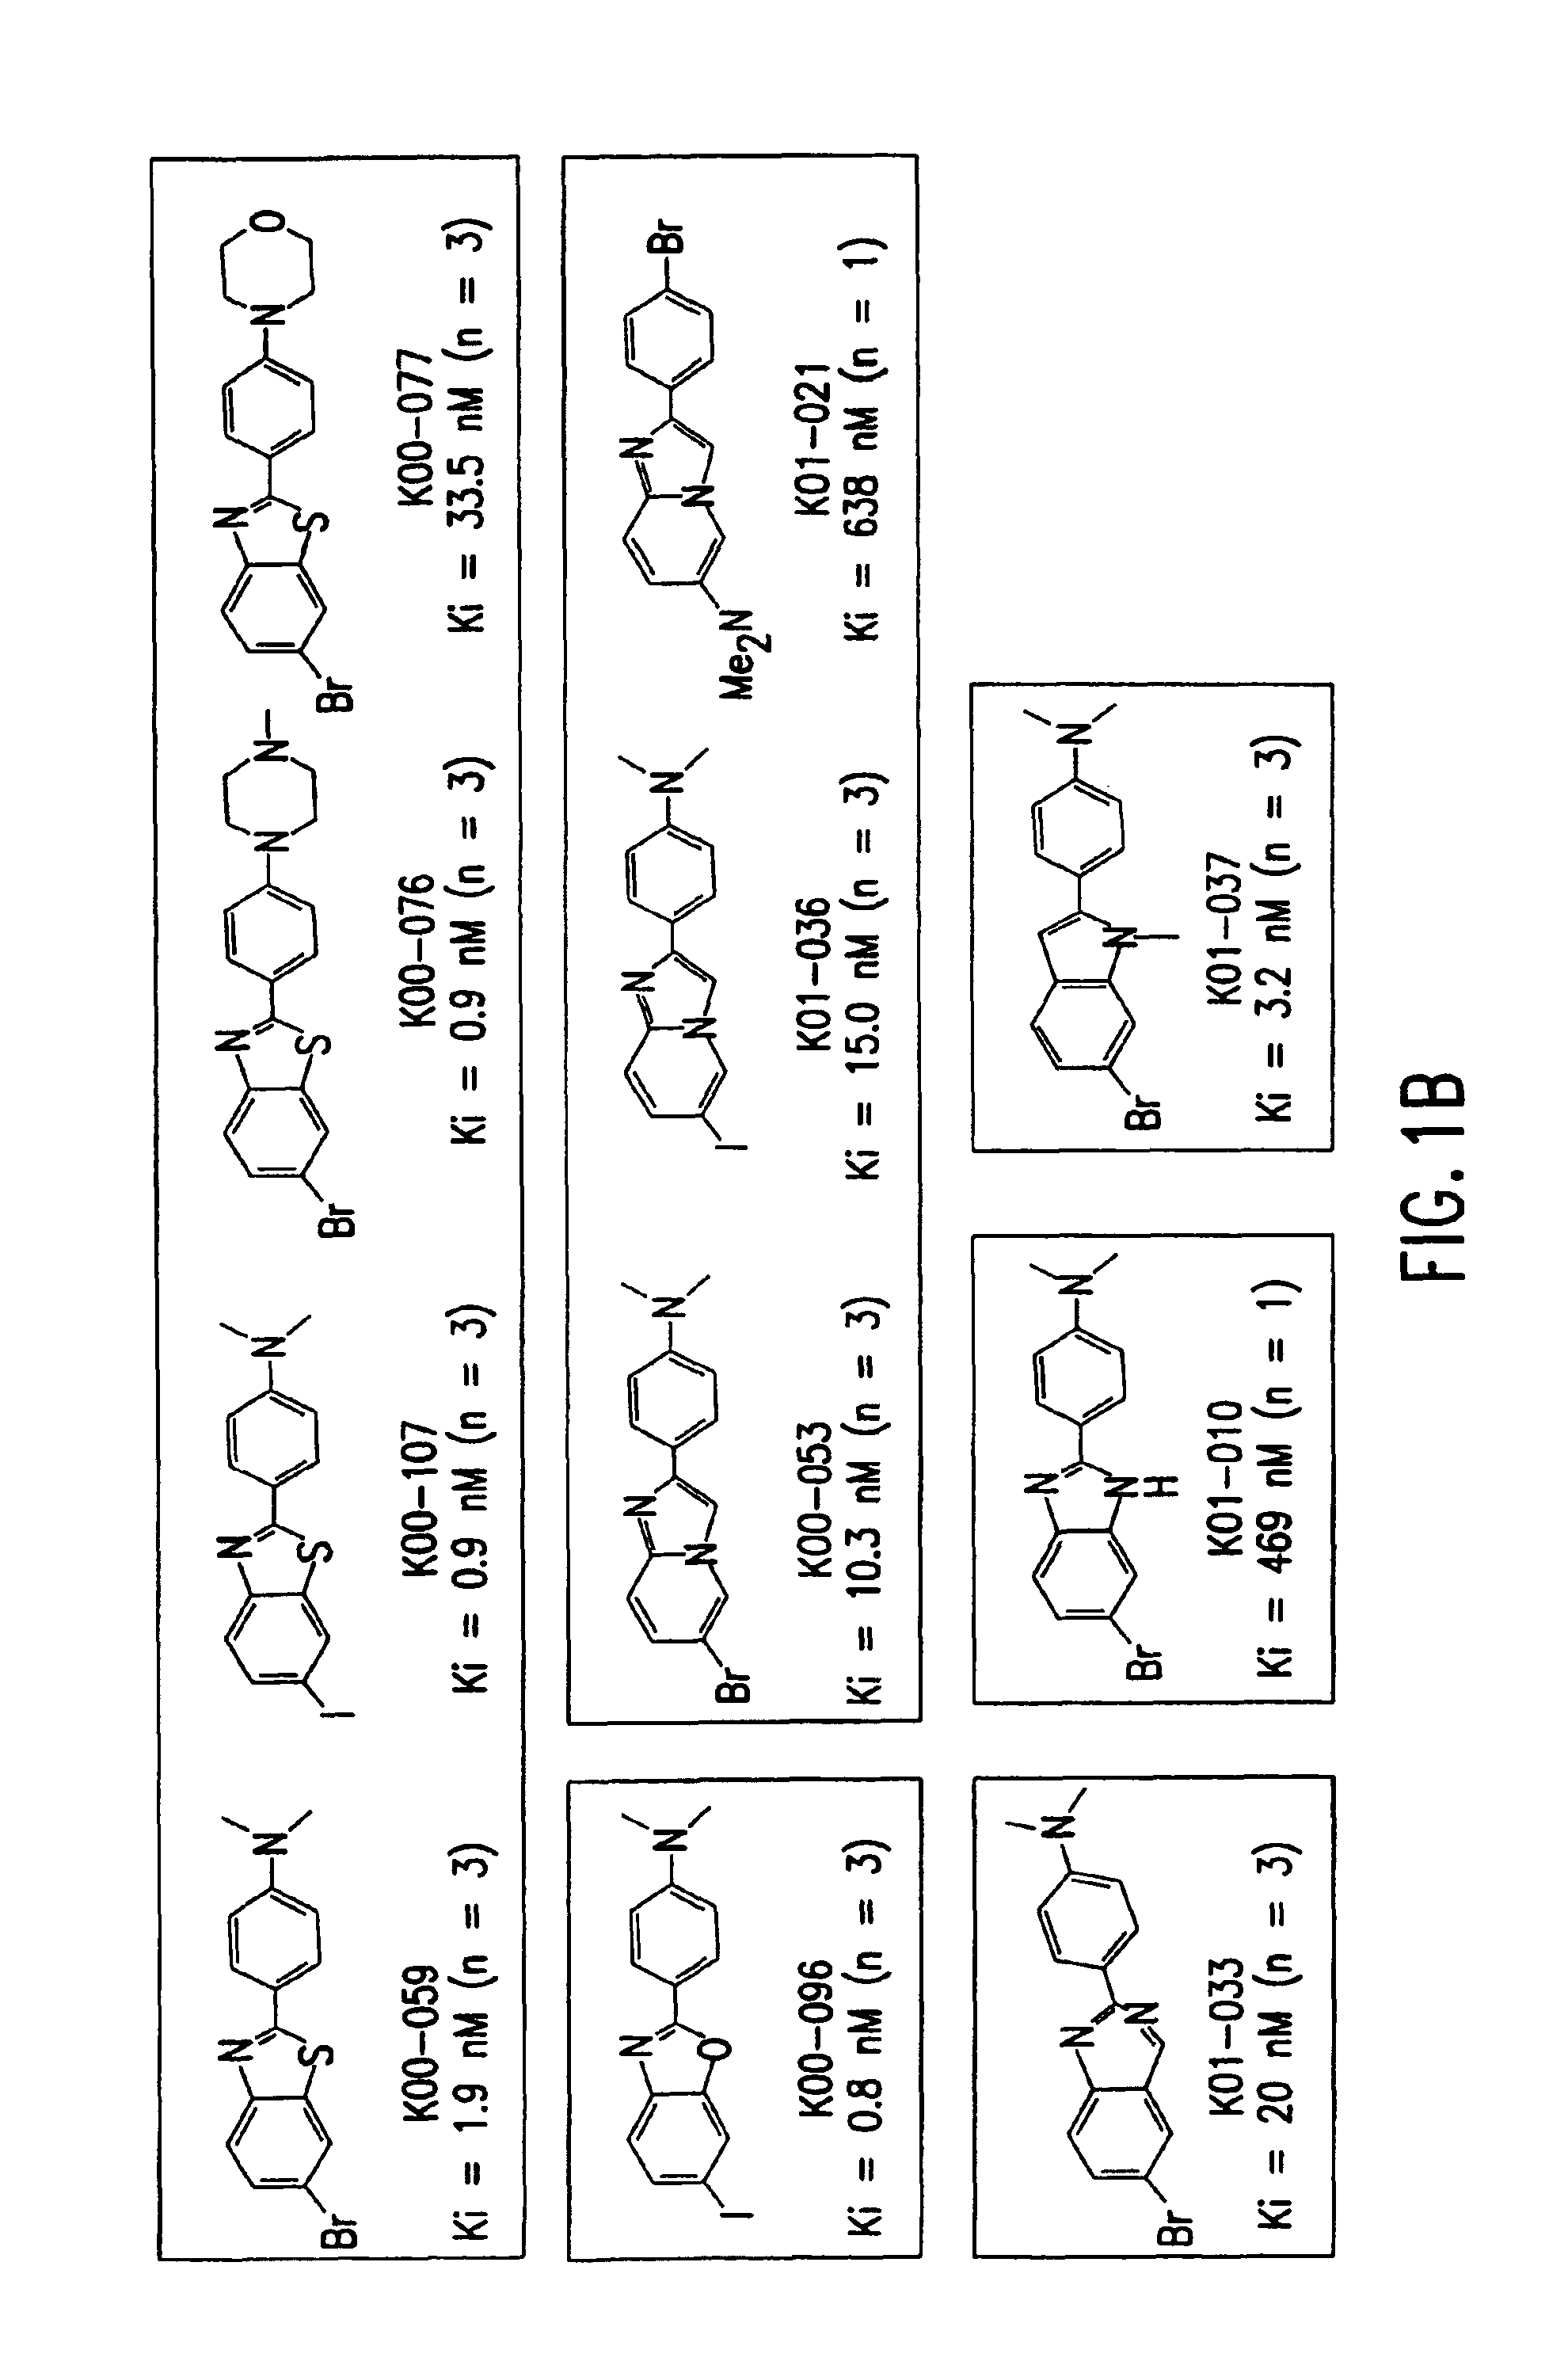 Amyloid plaque aggregation inhibitors and diagnostic imaging agents